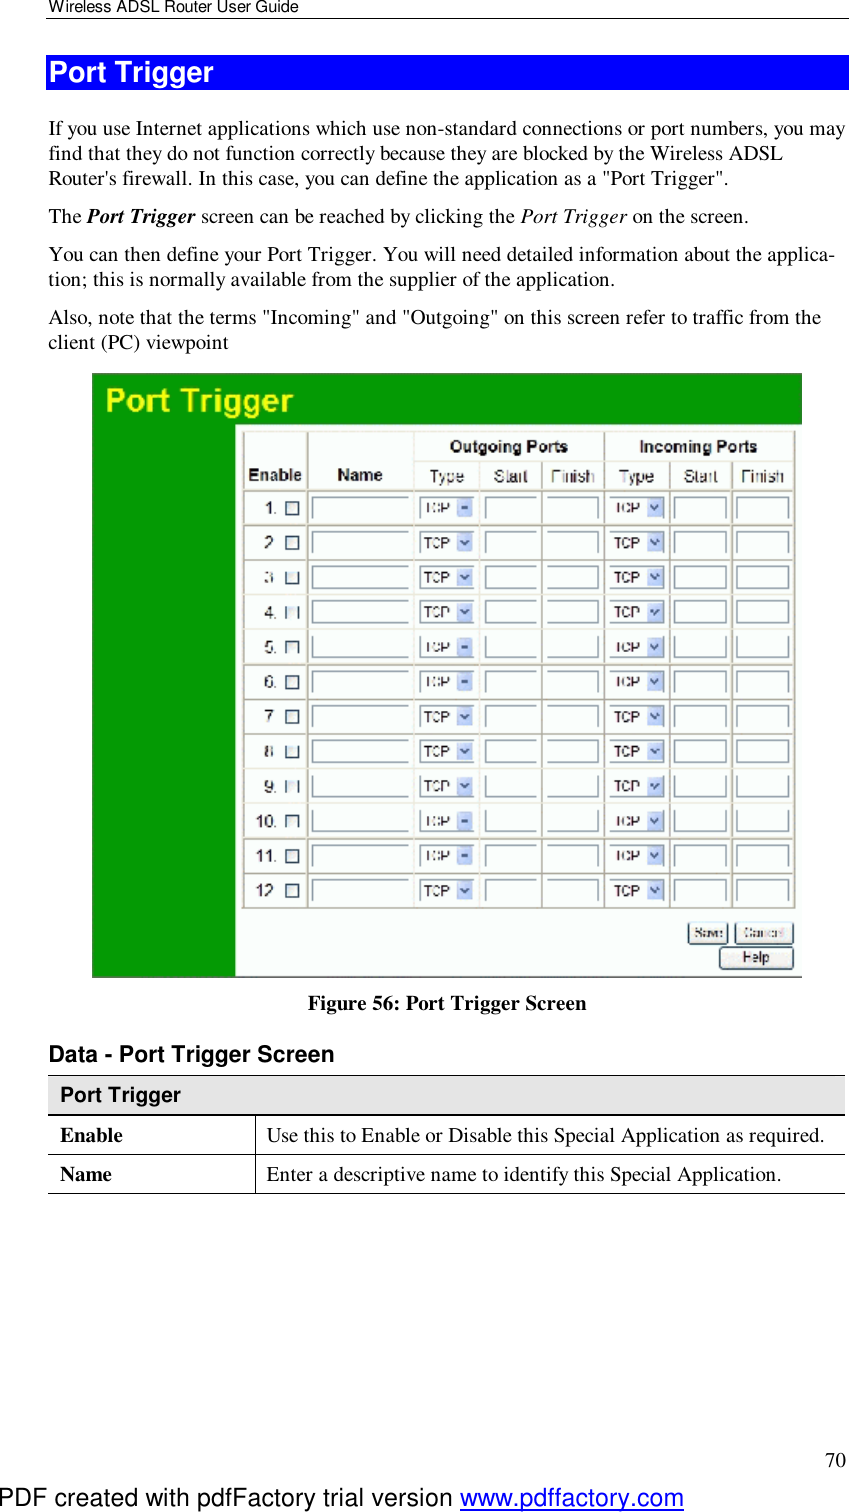 Wireless ADSL Router User Guide 70 Port Trigger If you use Internet applications which use non-standard connections or port numbers, you may find that they do not function correctly because they are blocked by the Wireless ADSL Router&apos;s firewall. In this case, you can define the application as a &quot;Port Trigger&quot;. The Port Trigger screen can be reached by clicking the Port Trigger on the screen. You can then define your Port Trigger. You will need detailed information about the applica-tion; this is normally available from the supplier of the application. Also, note that the terms &quot;Incoming&quot; and &quot;Outgoing&quot; on this screen refer to traffic from the client (PC) viewpoint  Figure 56: Port Trigger Screen Data - Port Trigger Screen Port Trigger Enable  Use this to Enable or Disable this Special Application as required. Name  Enter a descriptive name to identify this Special Application. PDF created with pdfFactory trial version www.pdffactory.com